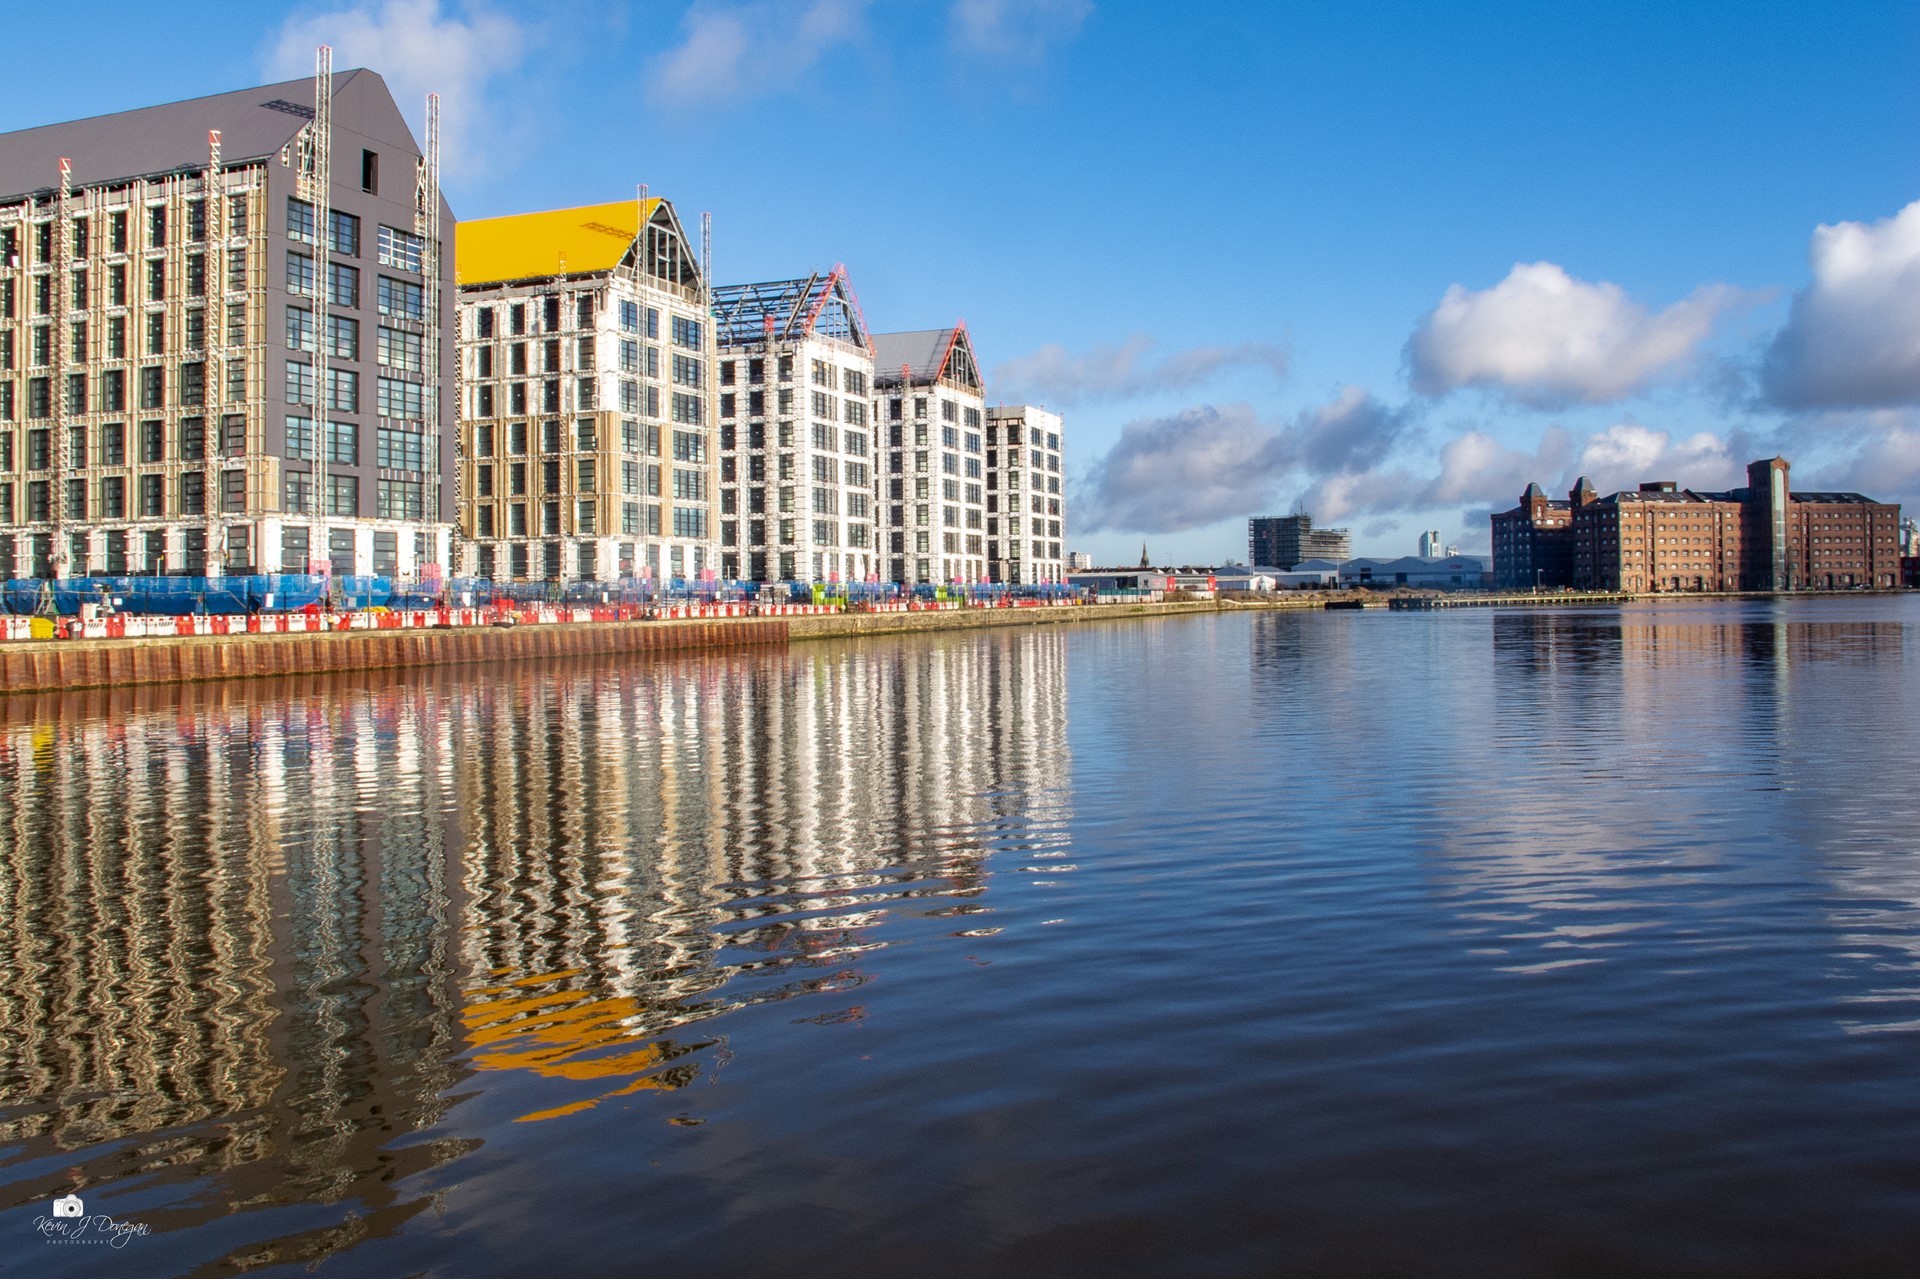 The Millers Quay development from Duke Street bridge by Kevin Donegan